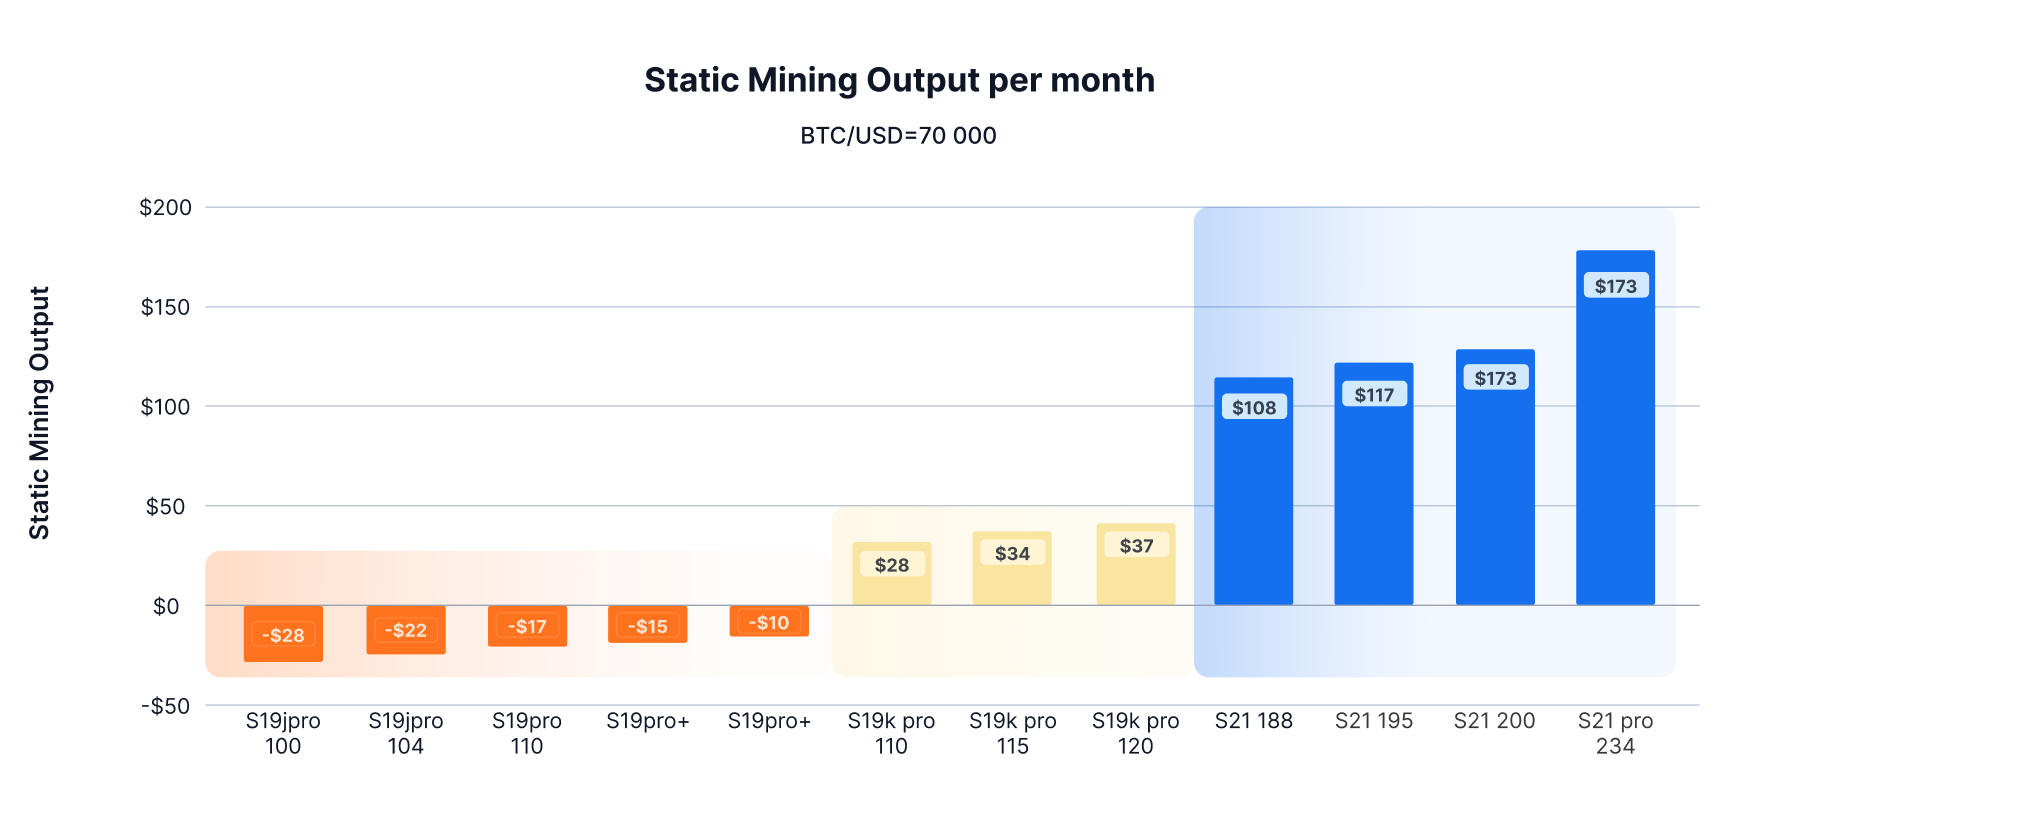 Static mining output